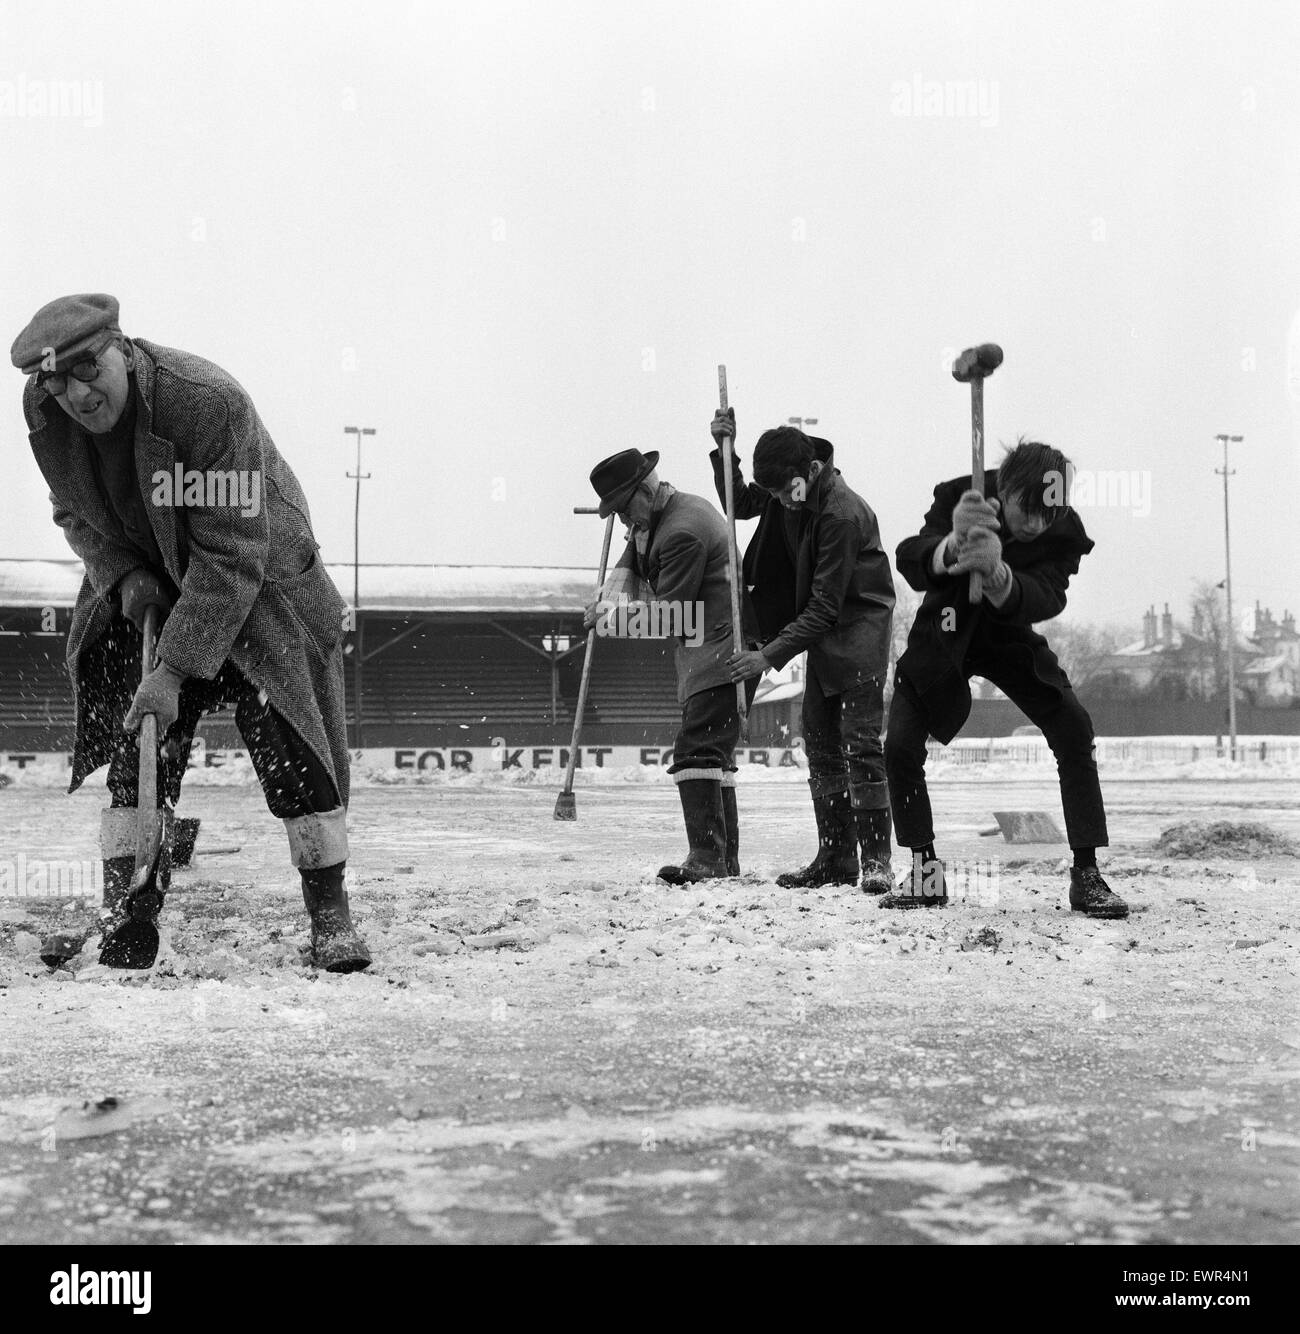 Gravesend and  Northfleet  training session in the snow ahead of their FA Cup fourth round match against Sunderland. Pictured are workmen trying to crack the ice on the Gravesend pitch in preparation for the match. 7th February 1963. Stock Photo